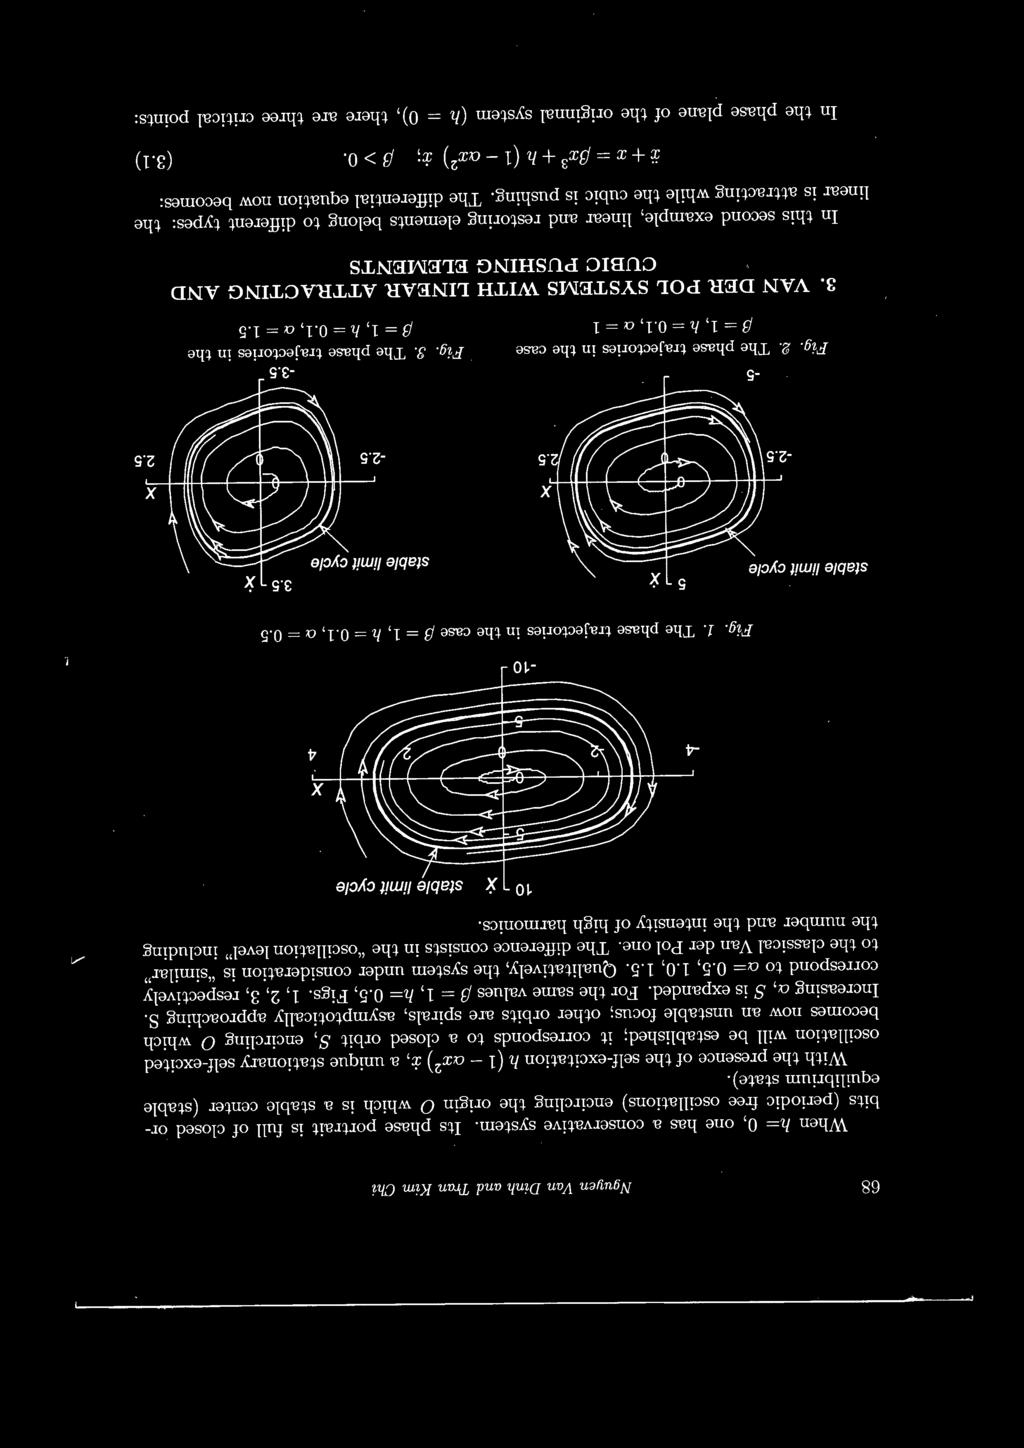 With the presence of the self-ecitation h (l - a 2 ) i:, a unique stationary self-ecited oscillation will be established; it corresponds to a closed orbit S, encircling 0 which becomes now an